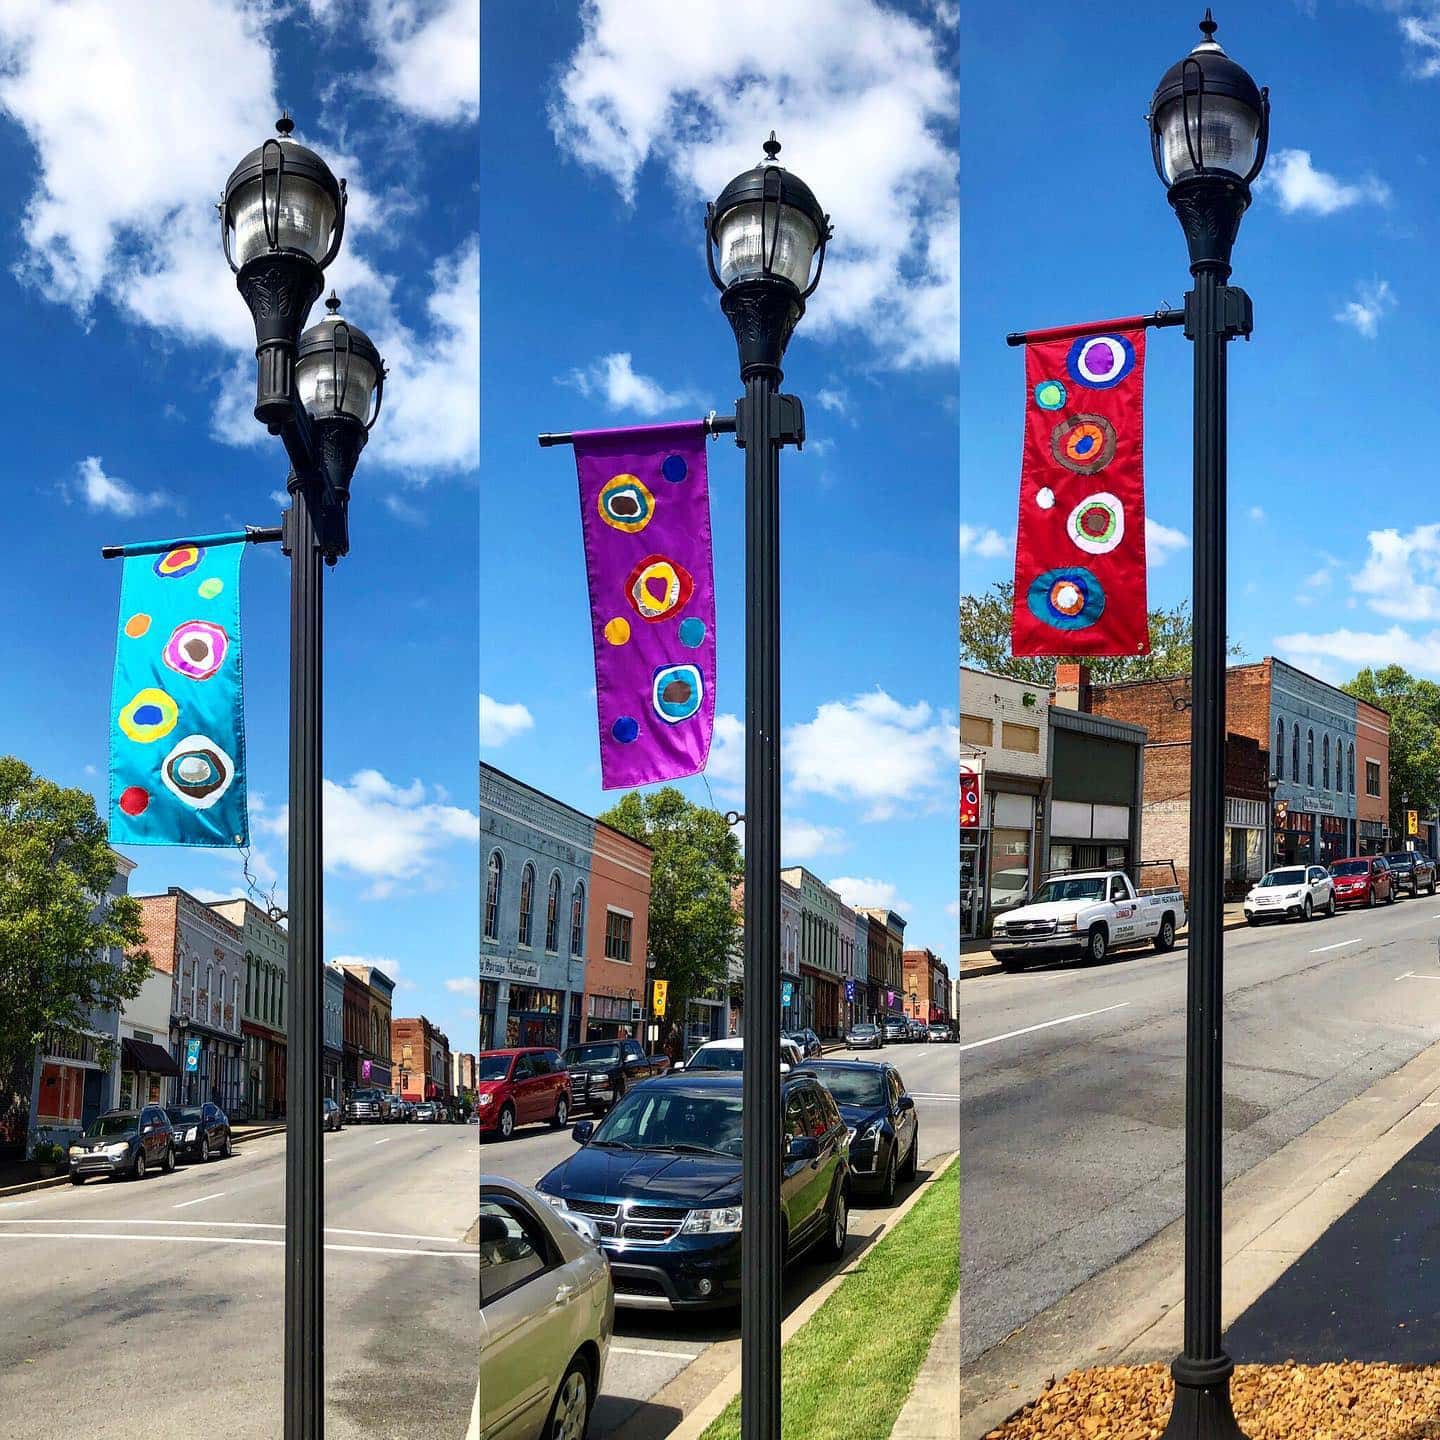 New Street Lamp Banners Add Pop of Color to Downtown | WPKY 103.3 FM ...